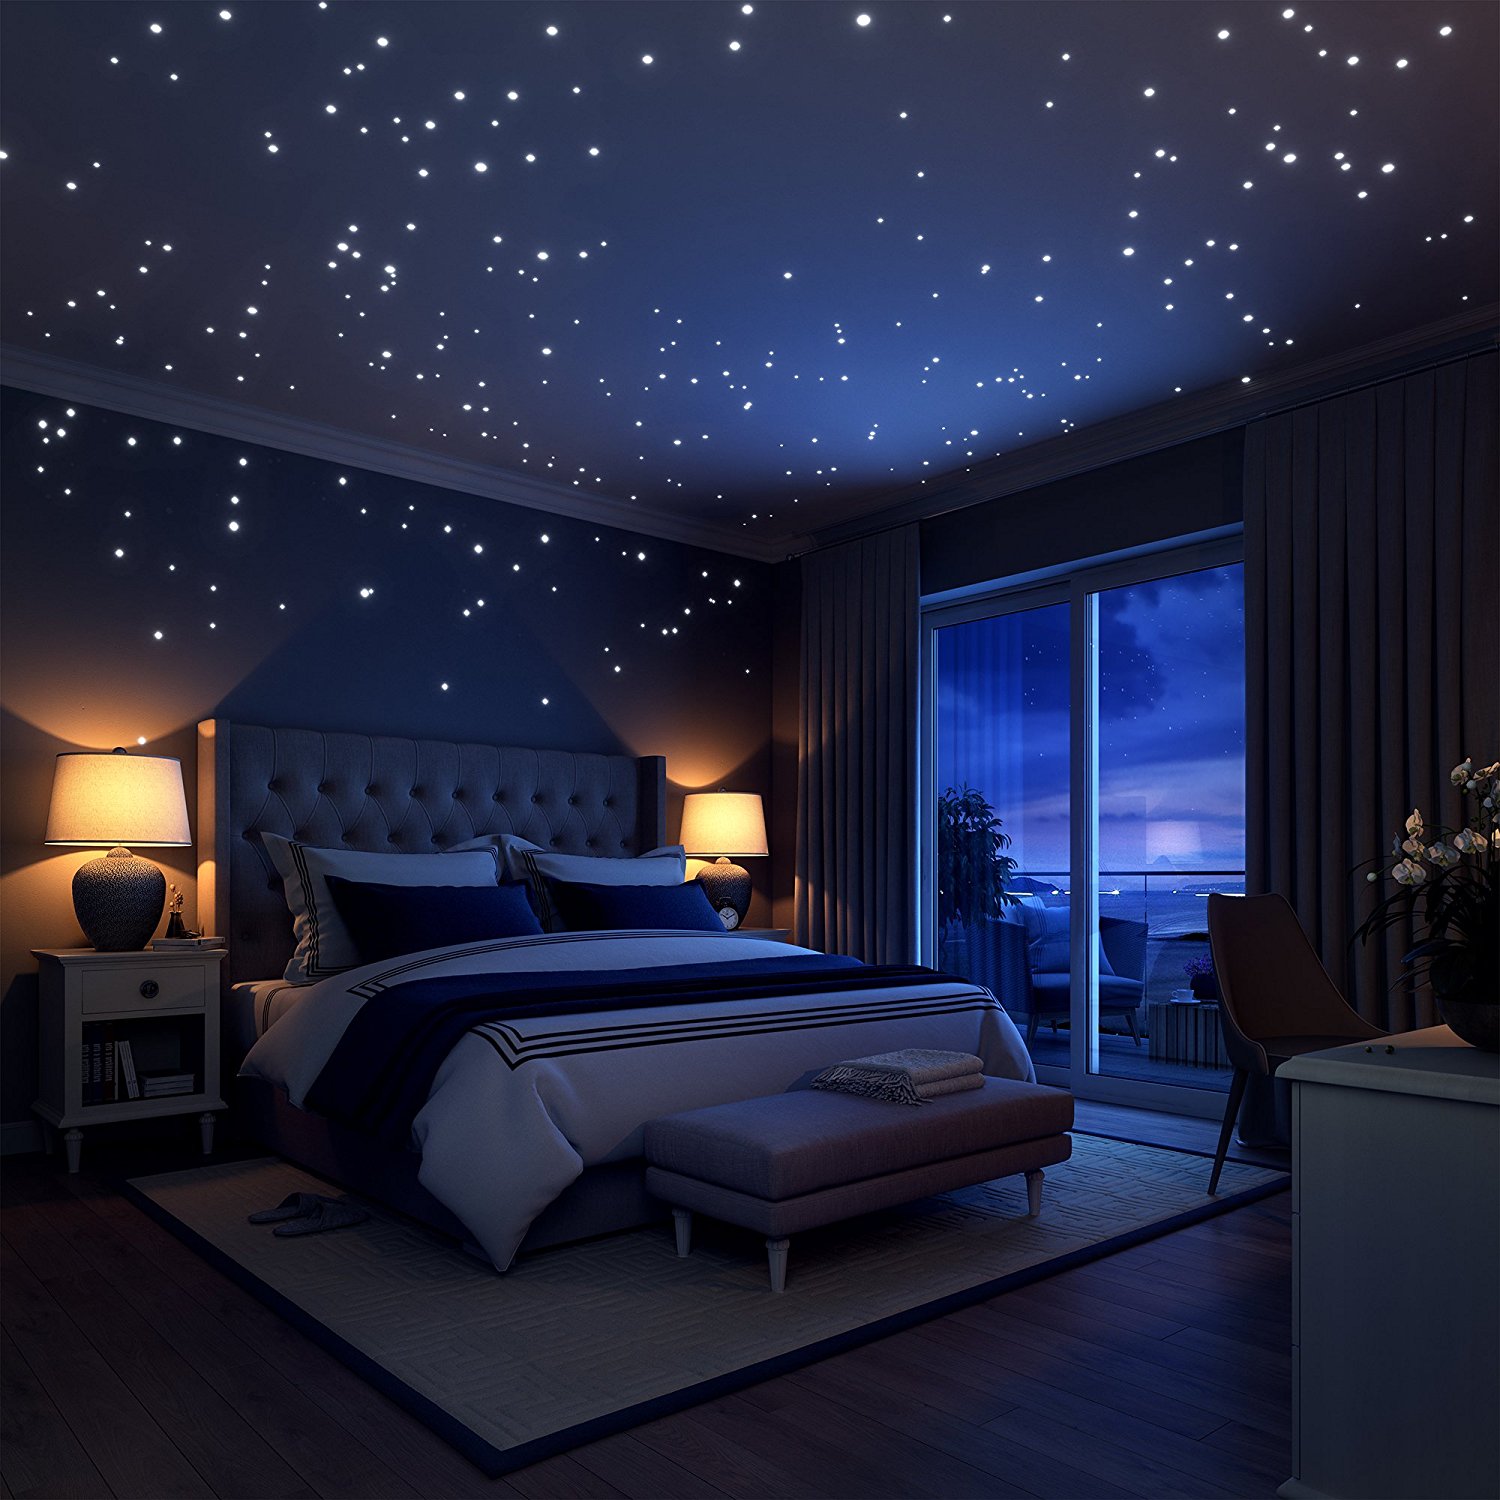 Glow In The Dark Stars Wall Stickers,252 Adhesive Dots and Moon for Starry Sky, Perfect For Kids Bedding Room or Birthday Gift ,Beautiful Wall Decals by LIDERSTAR ,Delight The One You Love.